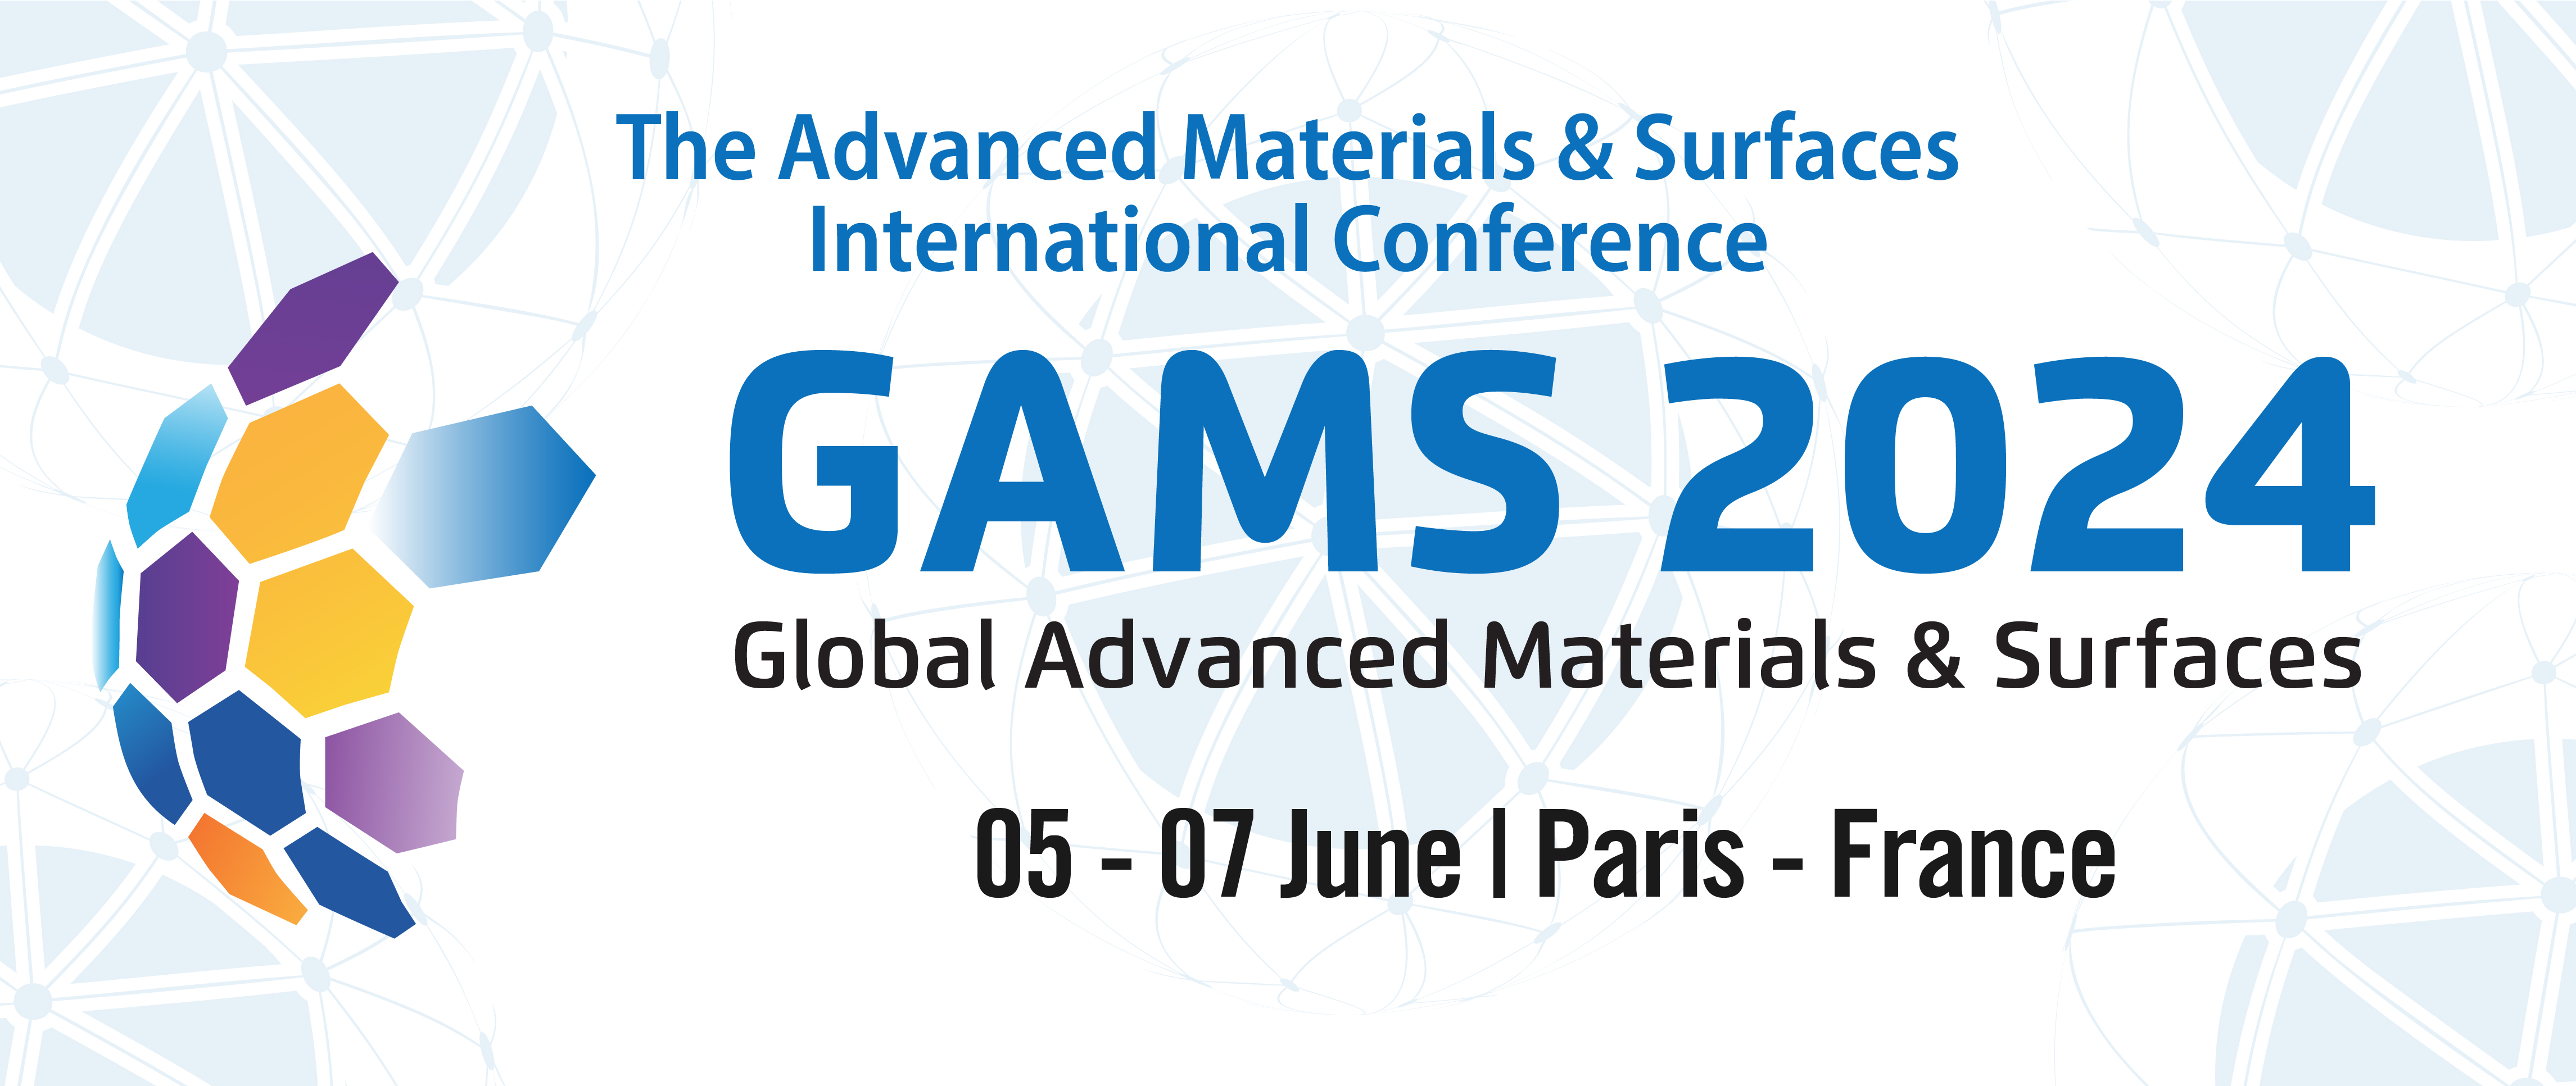 Global Advanced Materials & Surfaces International Conference 2024